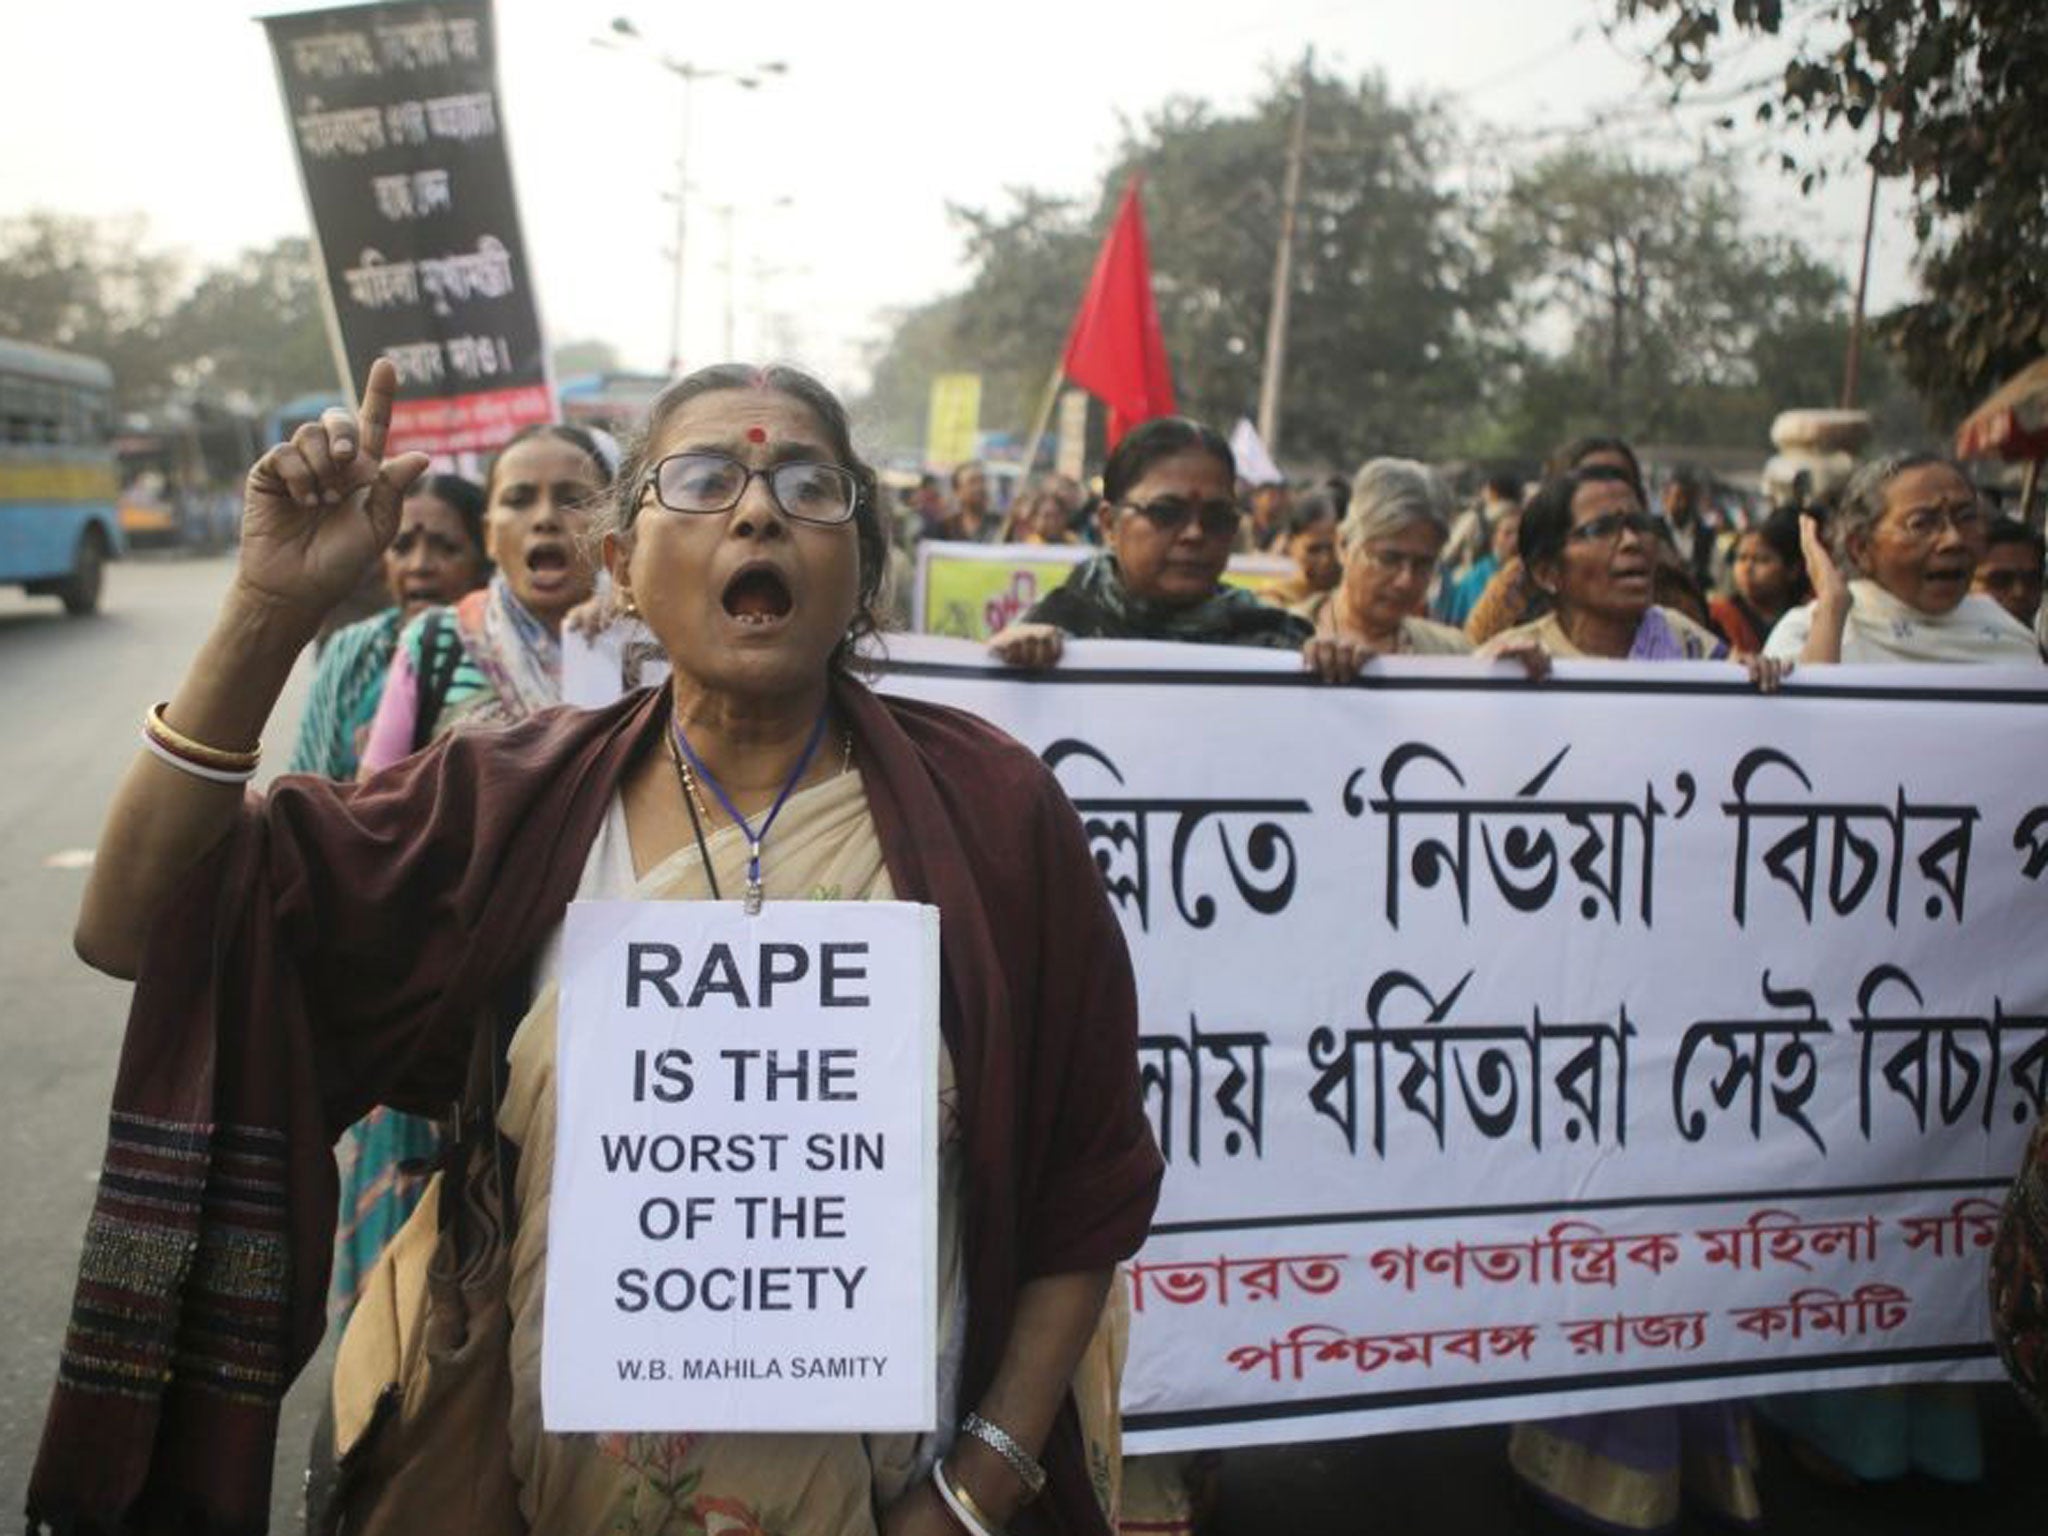 West Bengal Women's Forum activists walk a protest rally against a rape case in Calcutta, eastern India on 03 January 2014. A young girl was gang-raped on October 25 and afterwards repeatedly threatened by the accused, following which the disturbed girl s